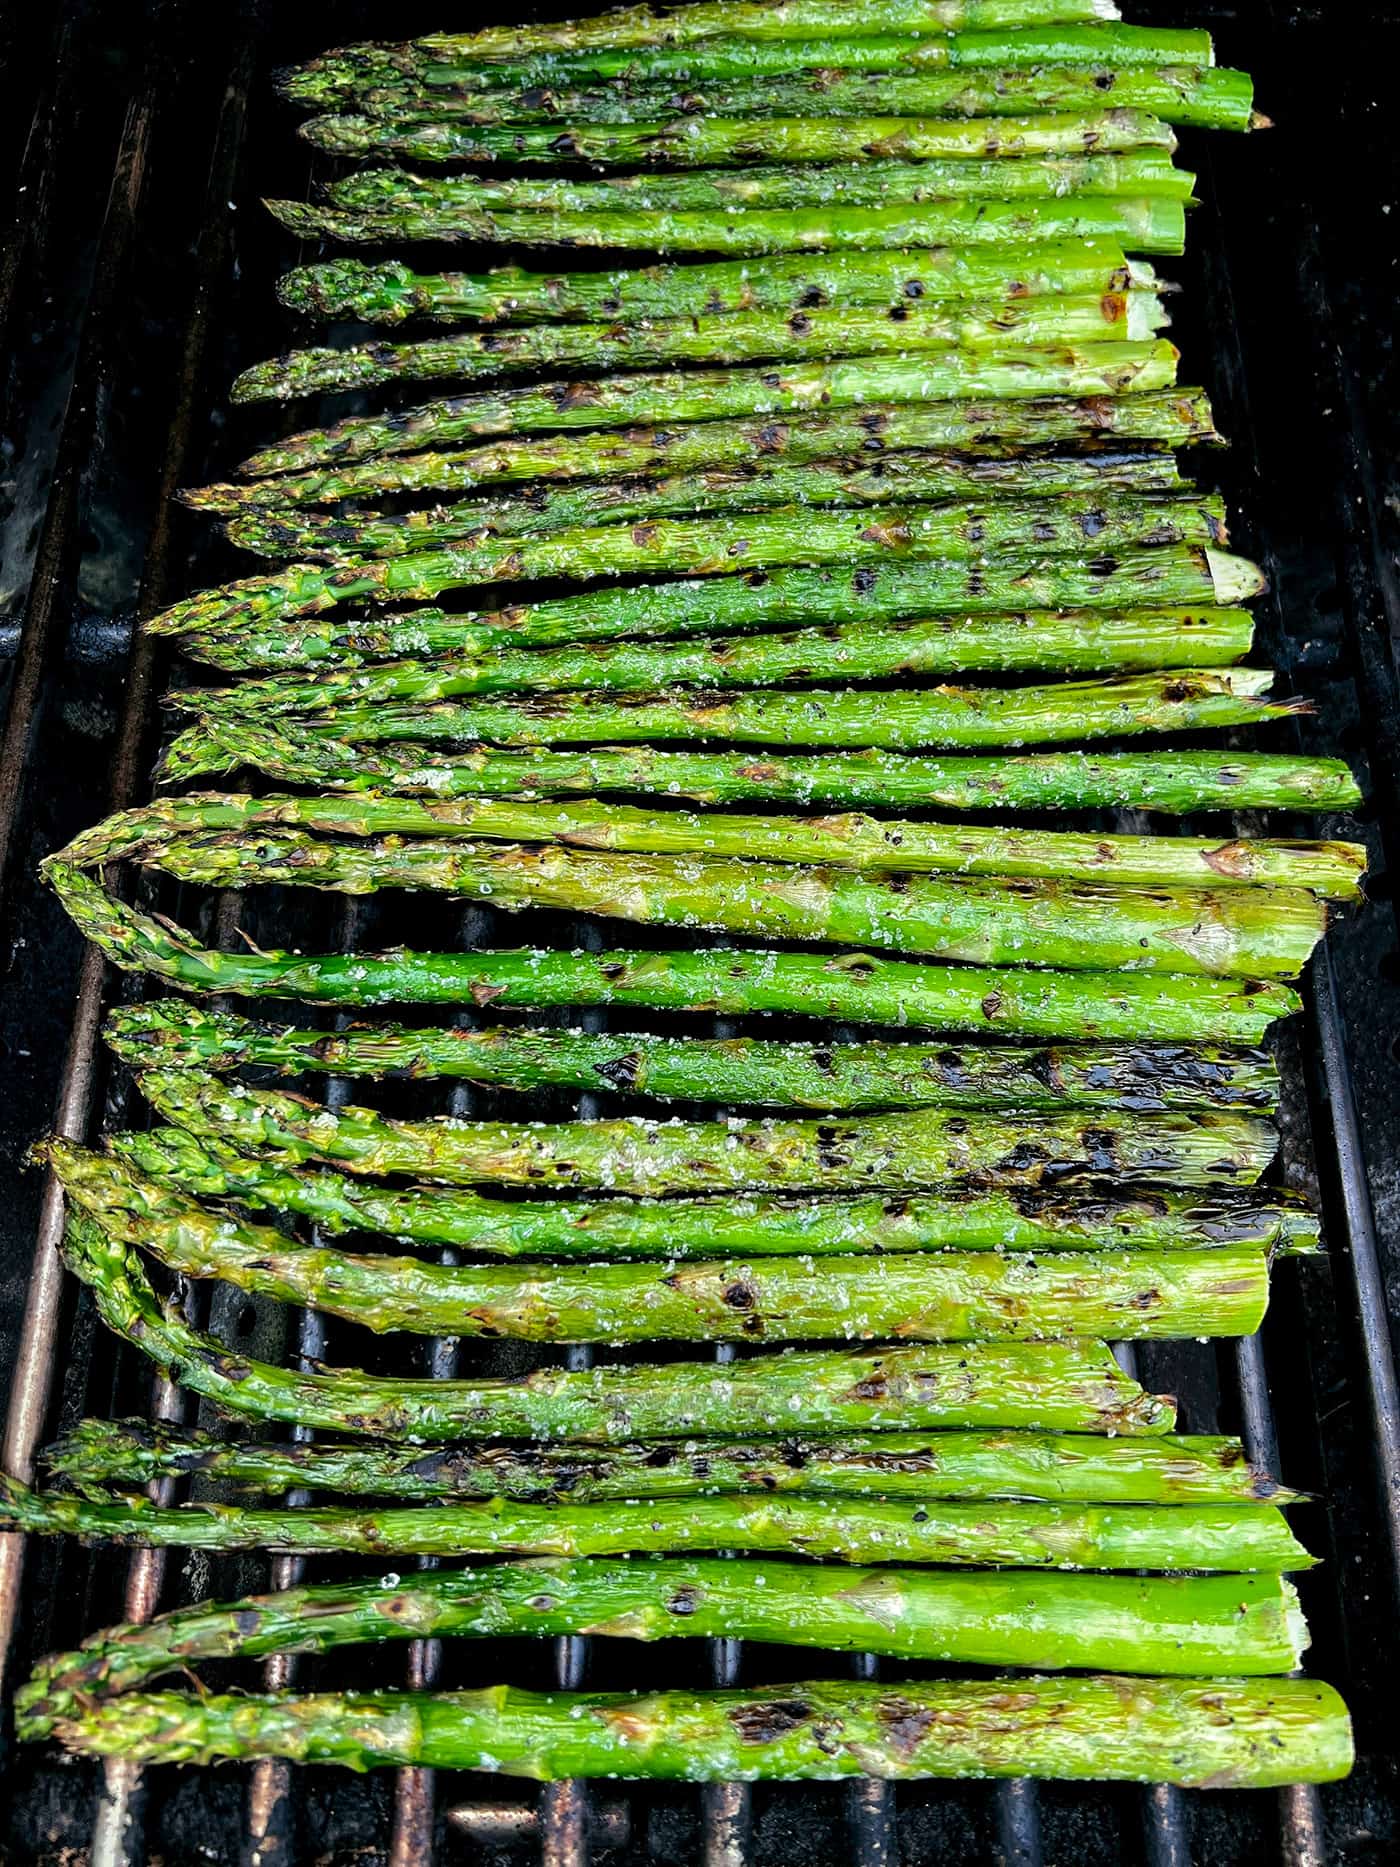 Asparagus on grill grates